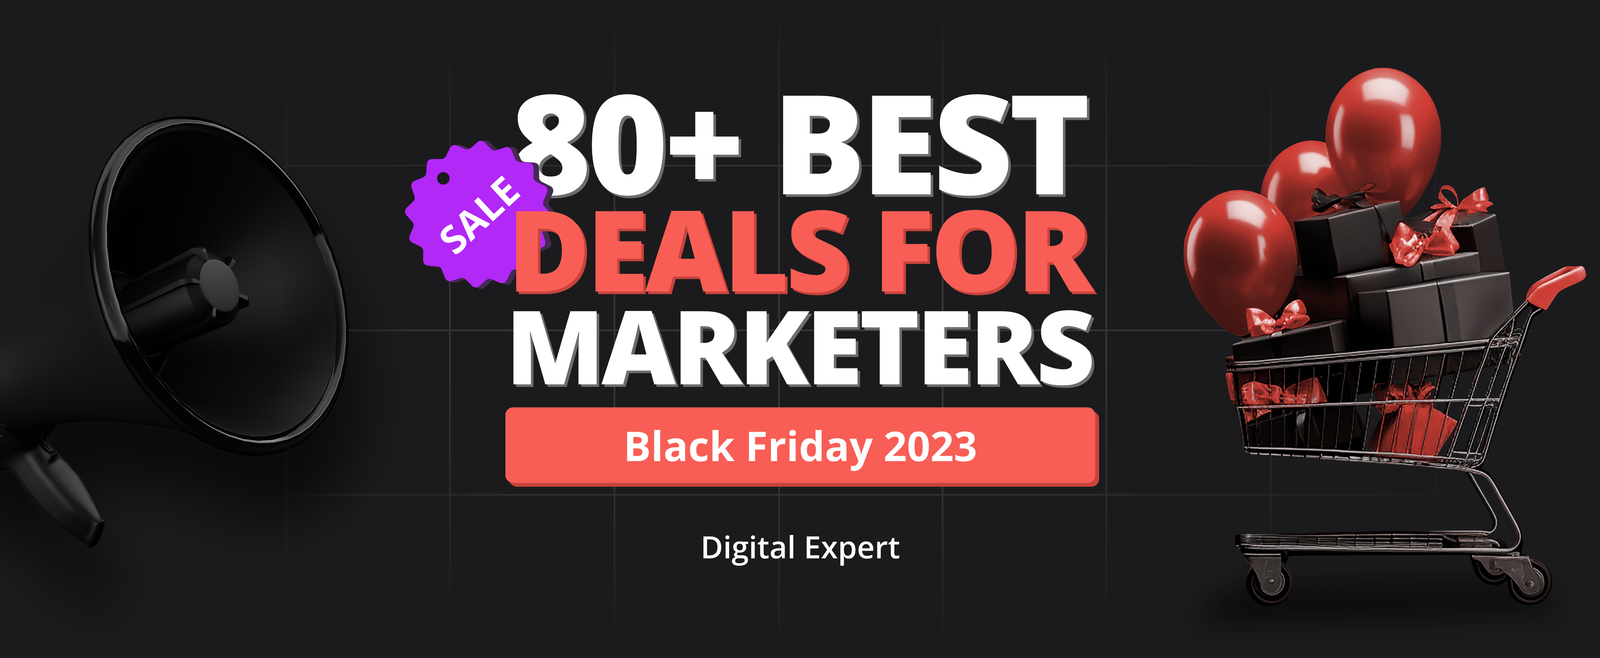 80+ Best Black Friday Deals for Marketers 2023